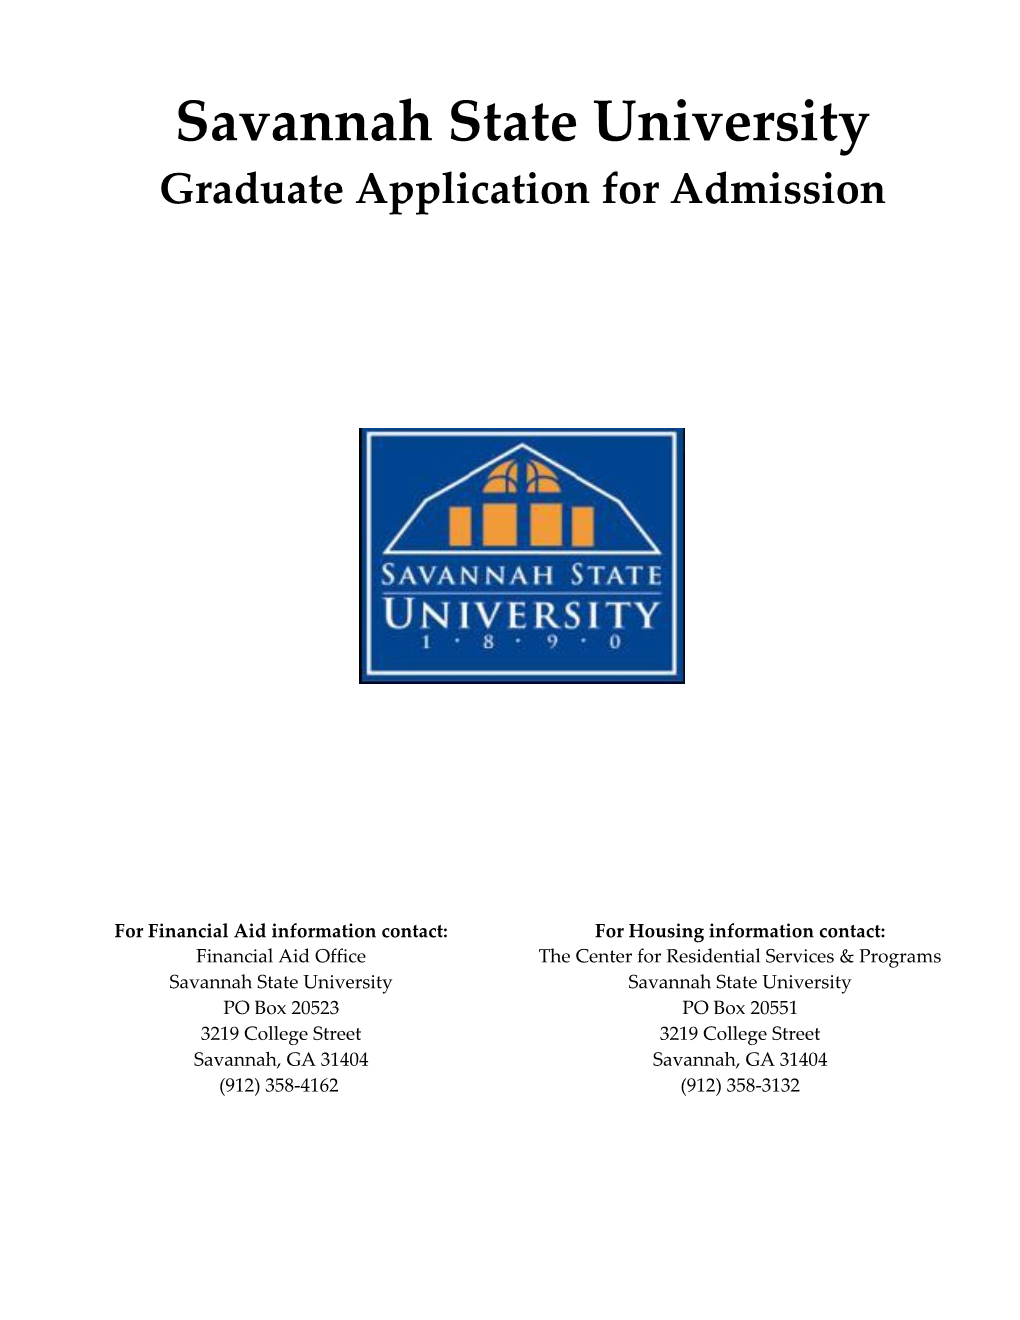 Graduate Application For Admission